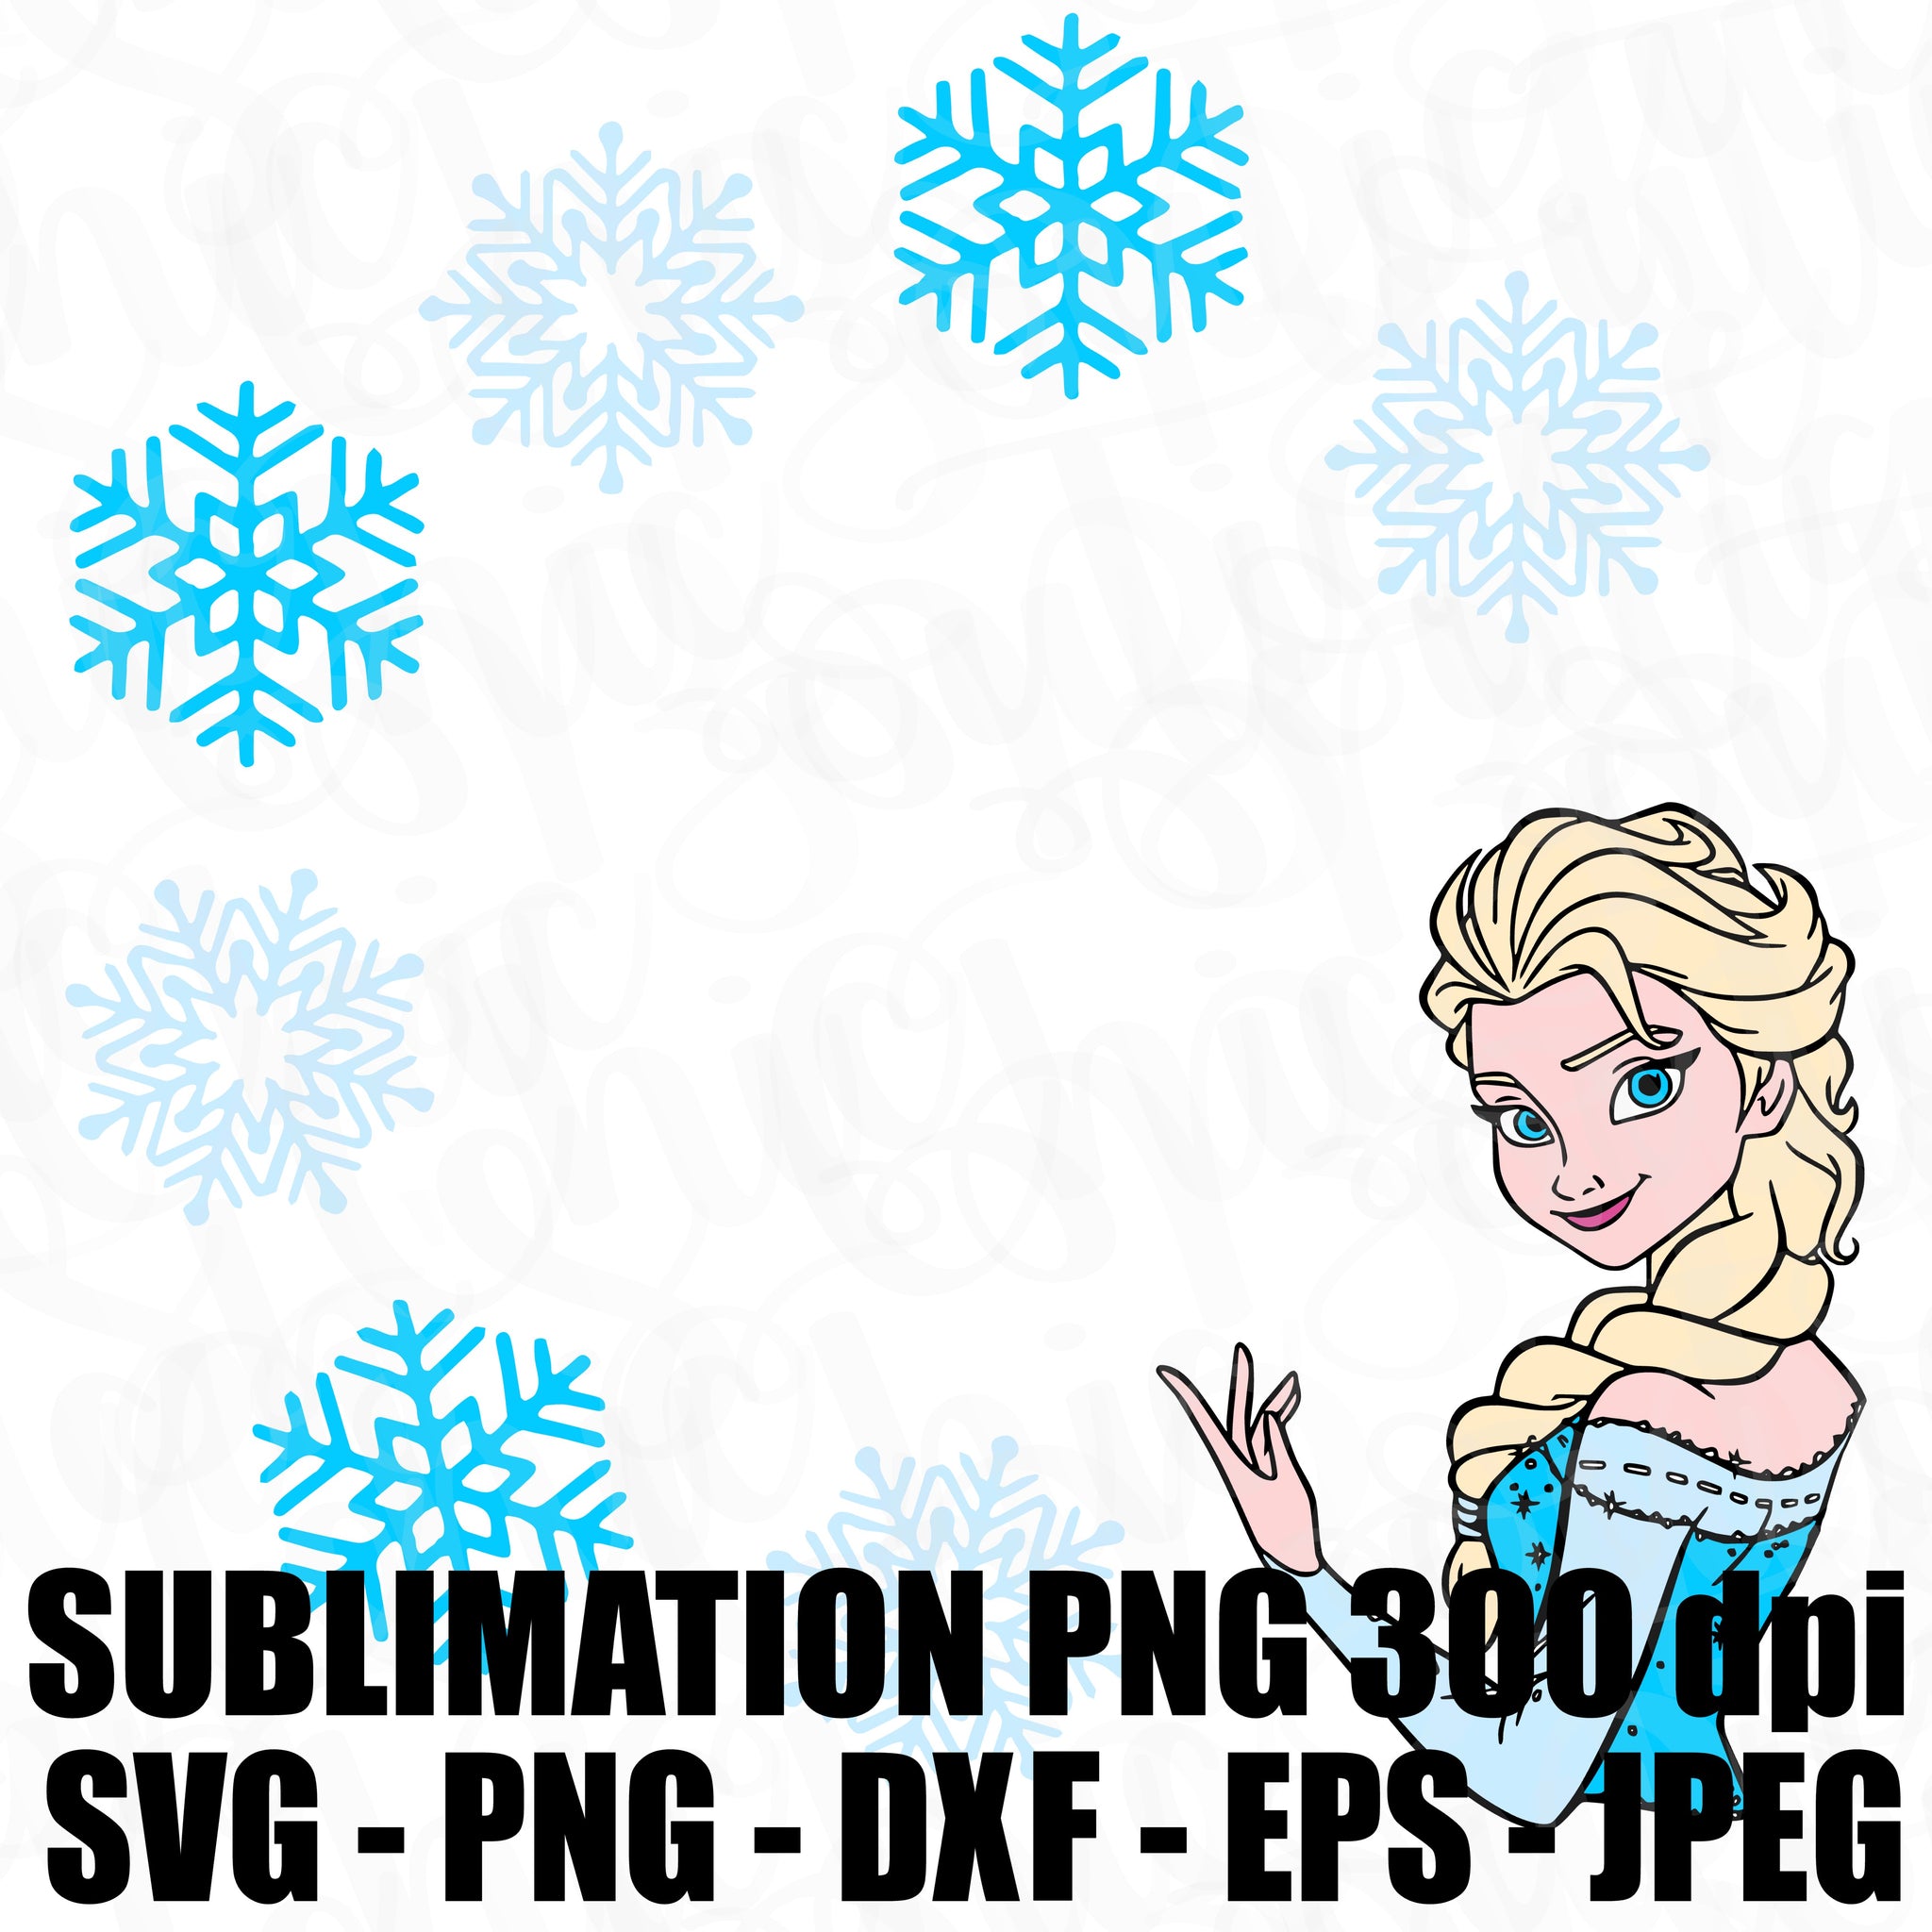 Download Frozen 2 Elsa Birthday Template With Snowflakes Svg Jpeg High Def 300d Tab S Chic Boutique